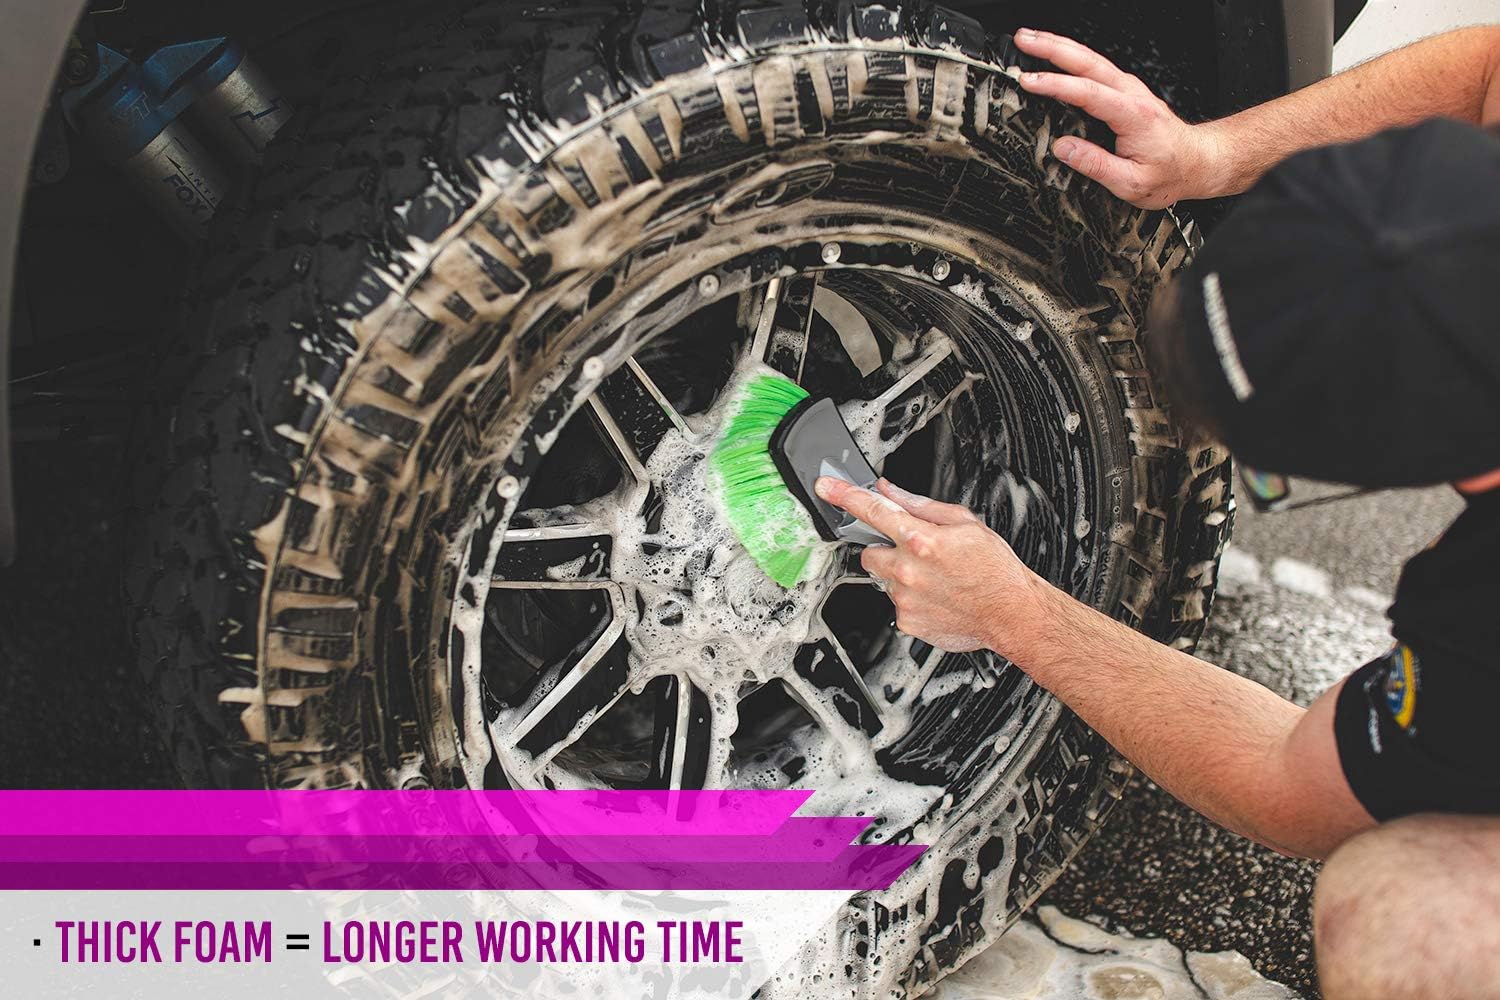 Applying P&S Brake Buster Wheel Cleaner, showcasing a clean and protected finish free from stains and corrosion.